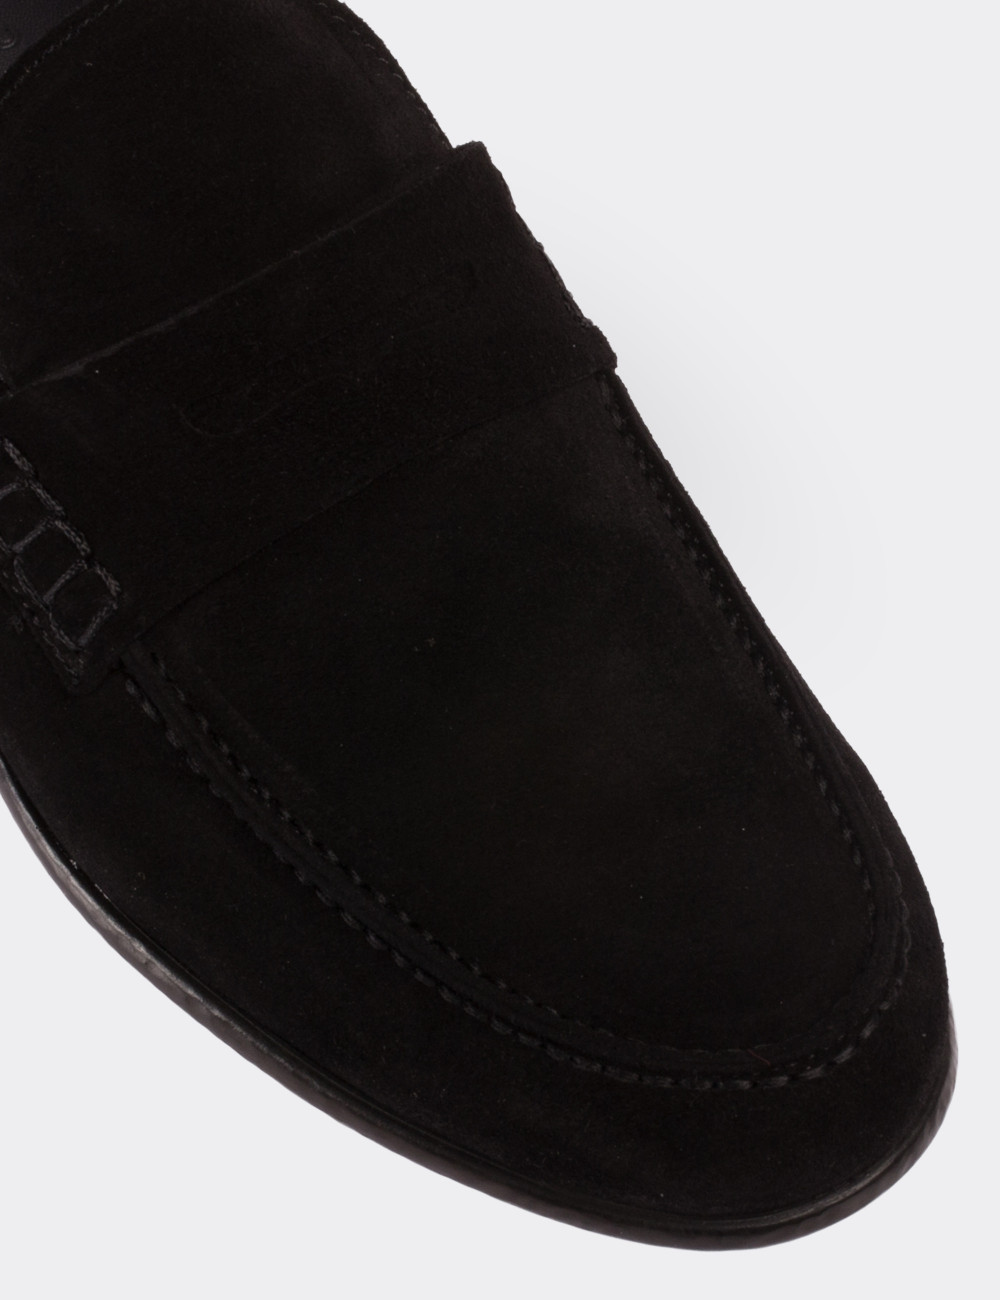 Black Suede Leather Loafers - 01538MSYHC01